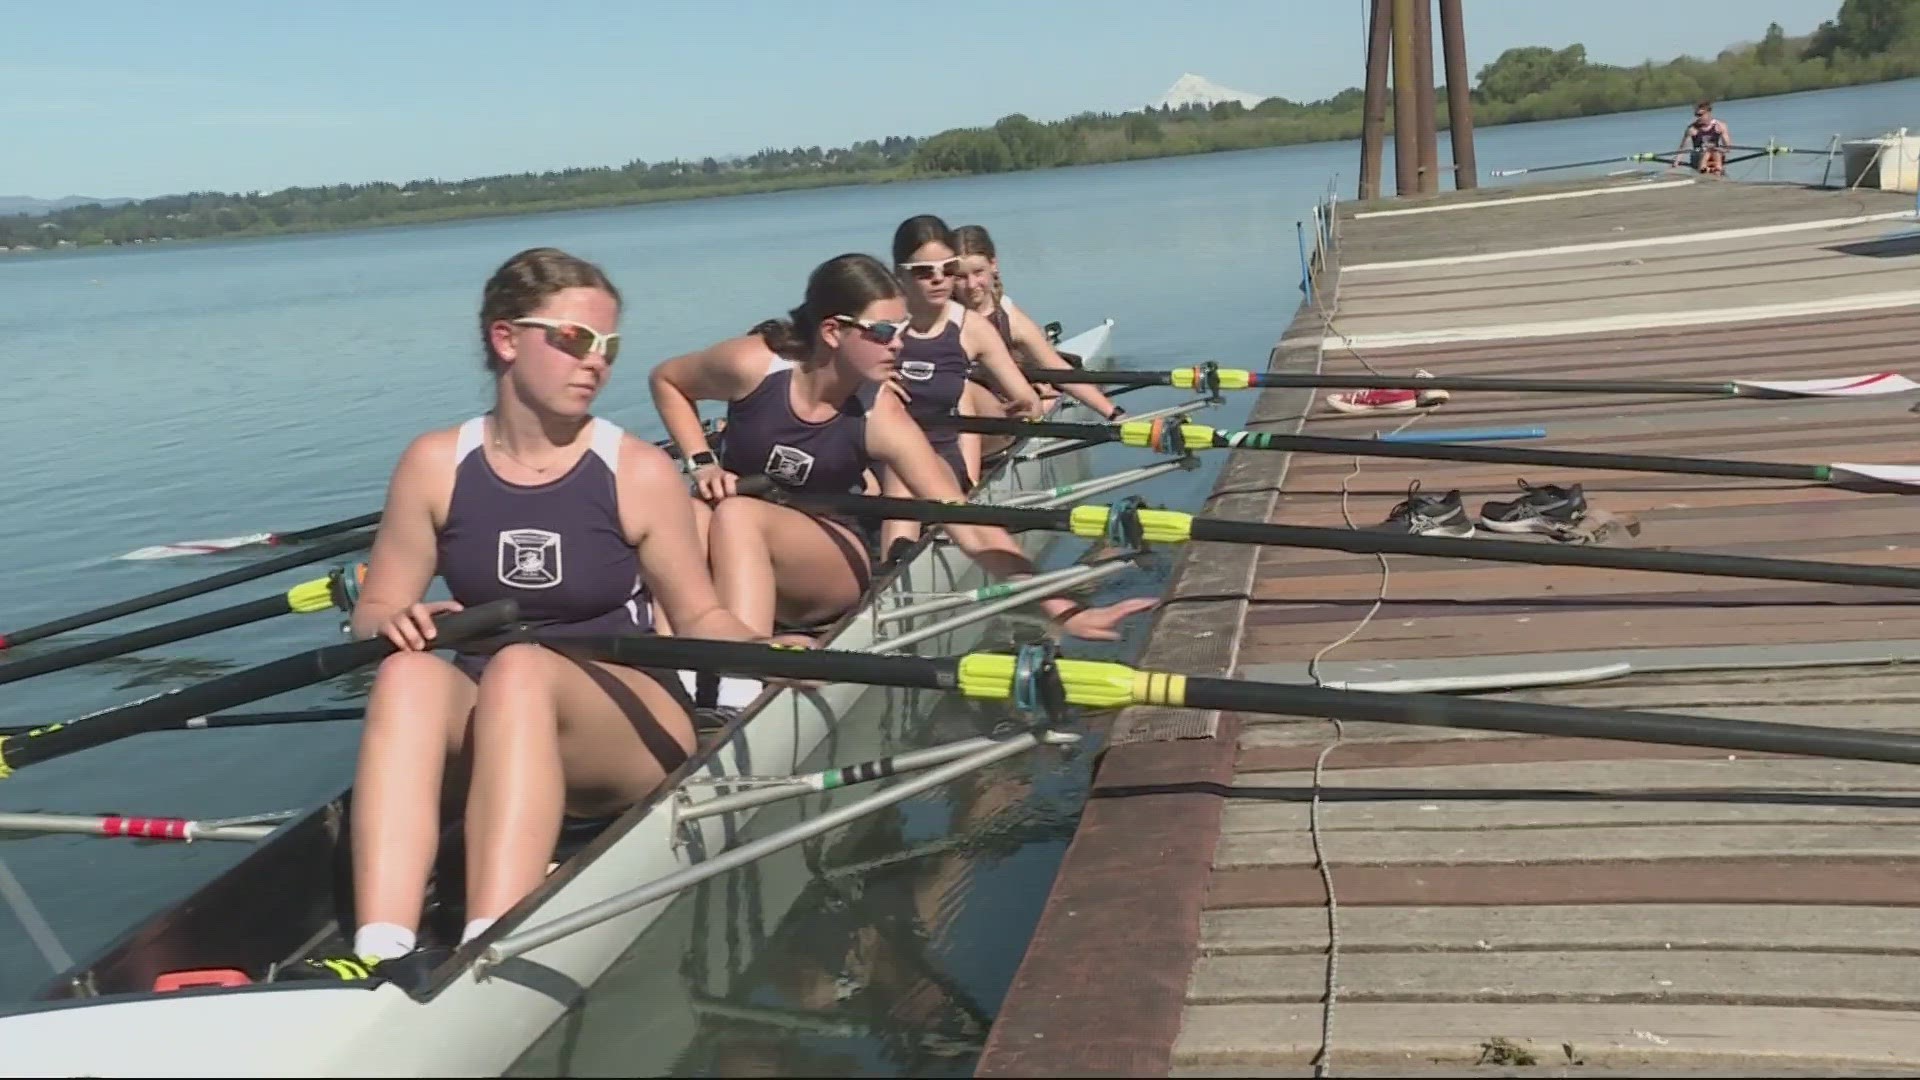 The novice women's quad team from the Vancouver Lake Rowing Club is now preparing for a championship on their home waters.